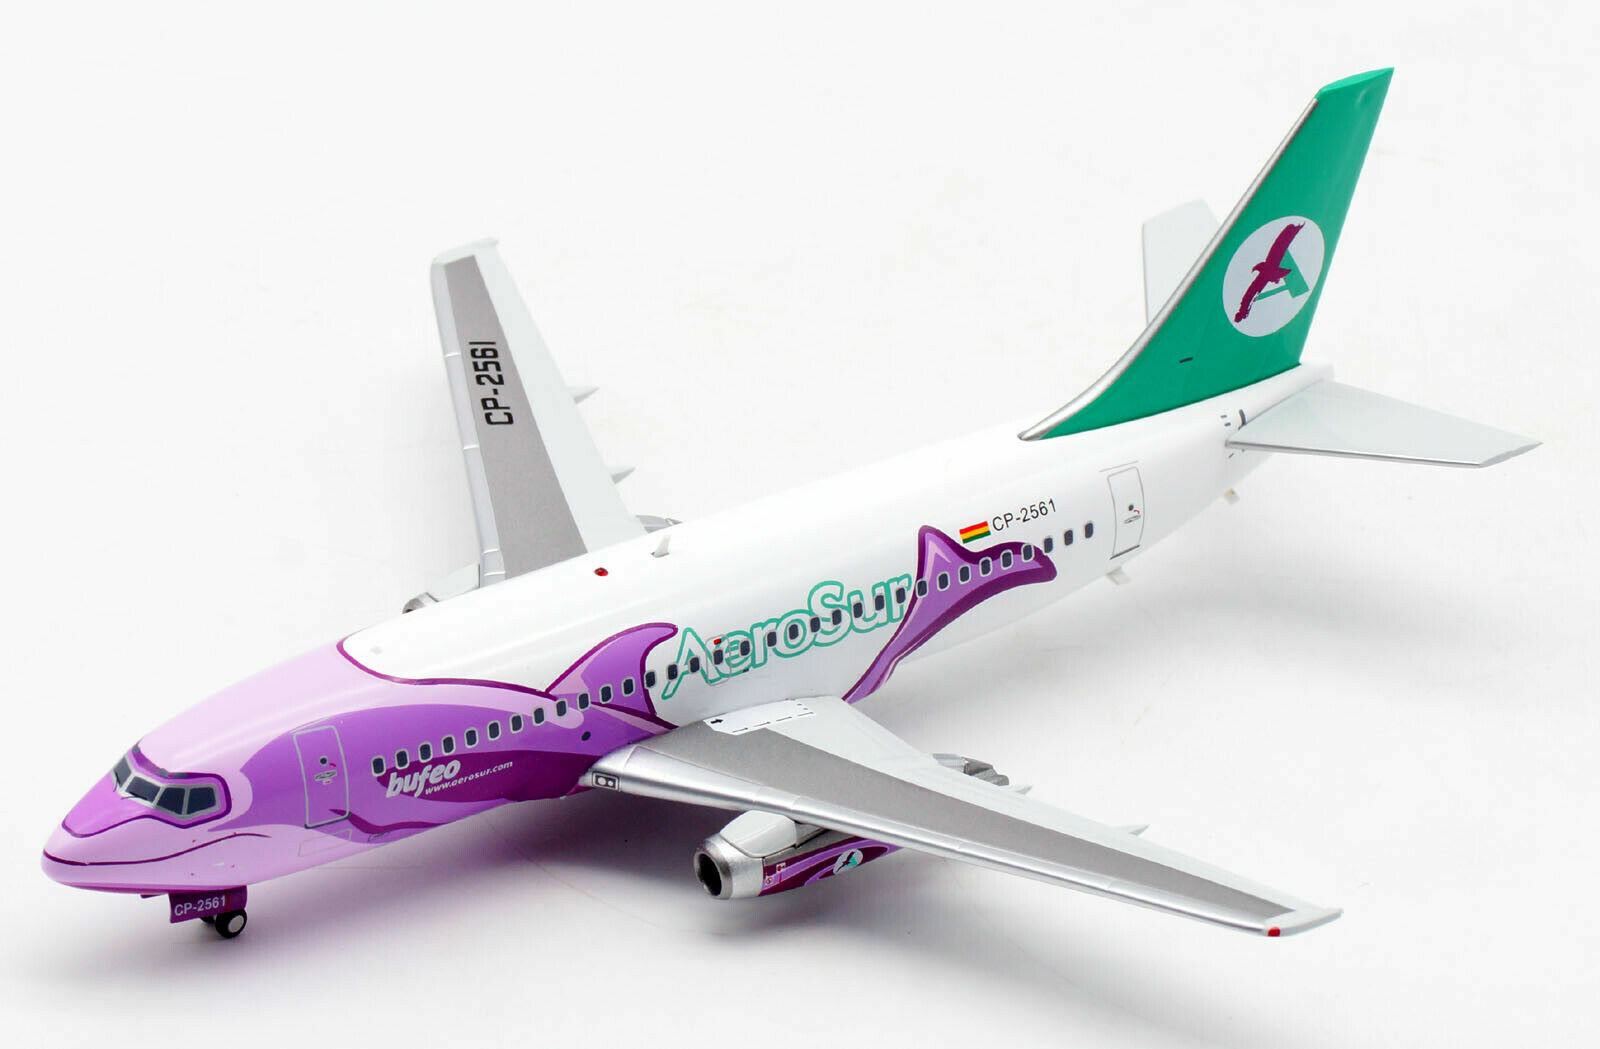 1:200 INF200 Aerosur B737-200 CP-2561 (BUFEO) with stand 